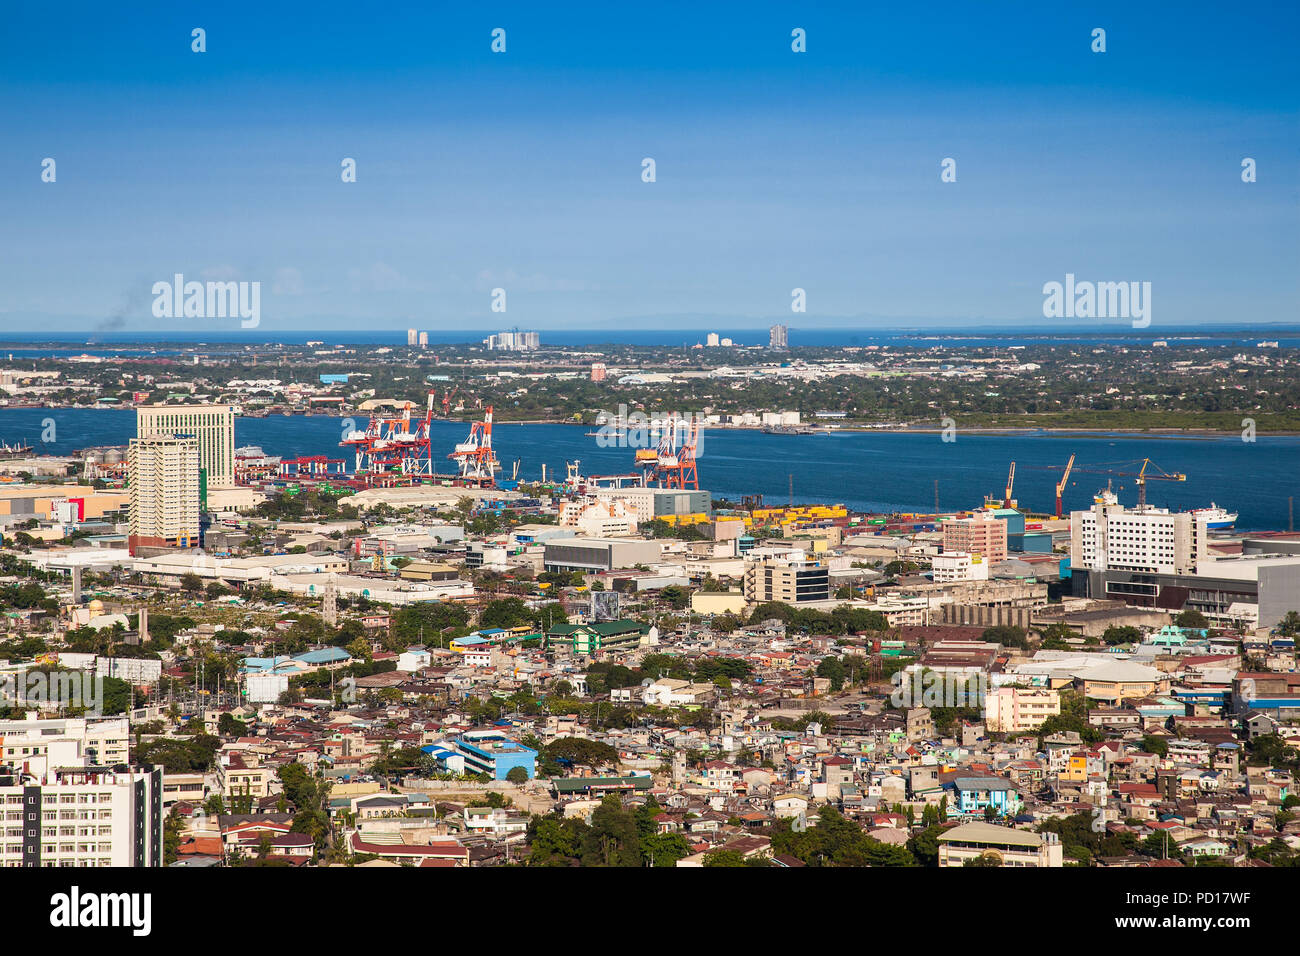 Panorama of Cebu city. Philippines. Cebu is the Philippines second most significant metropolitan centre and main domestic shipping port. Stock Photo